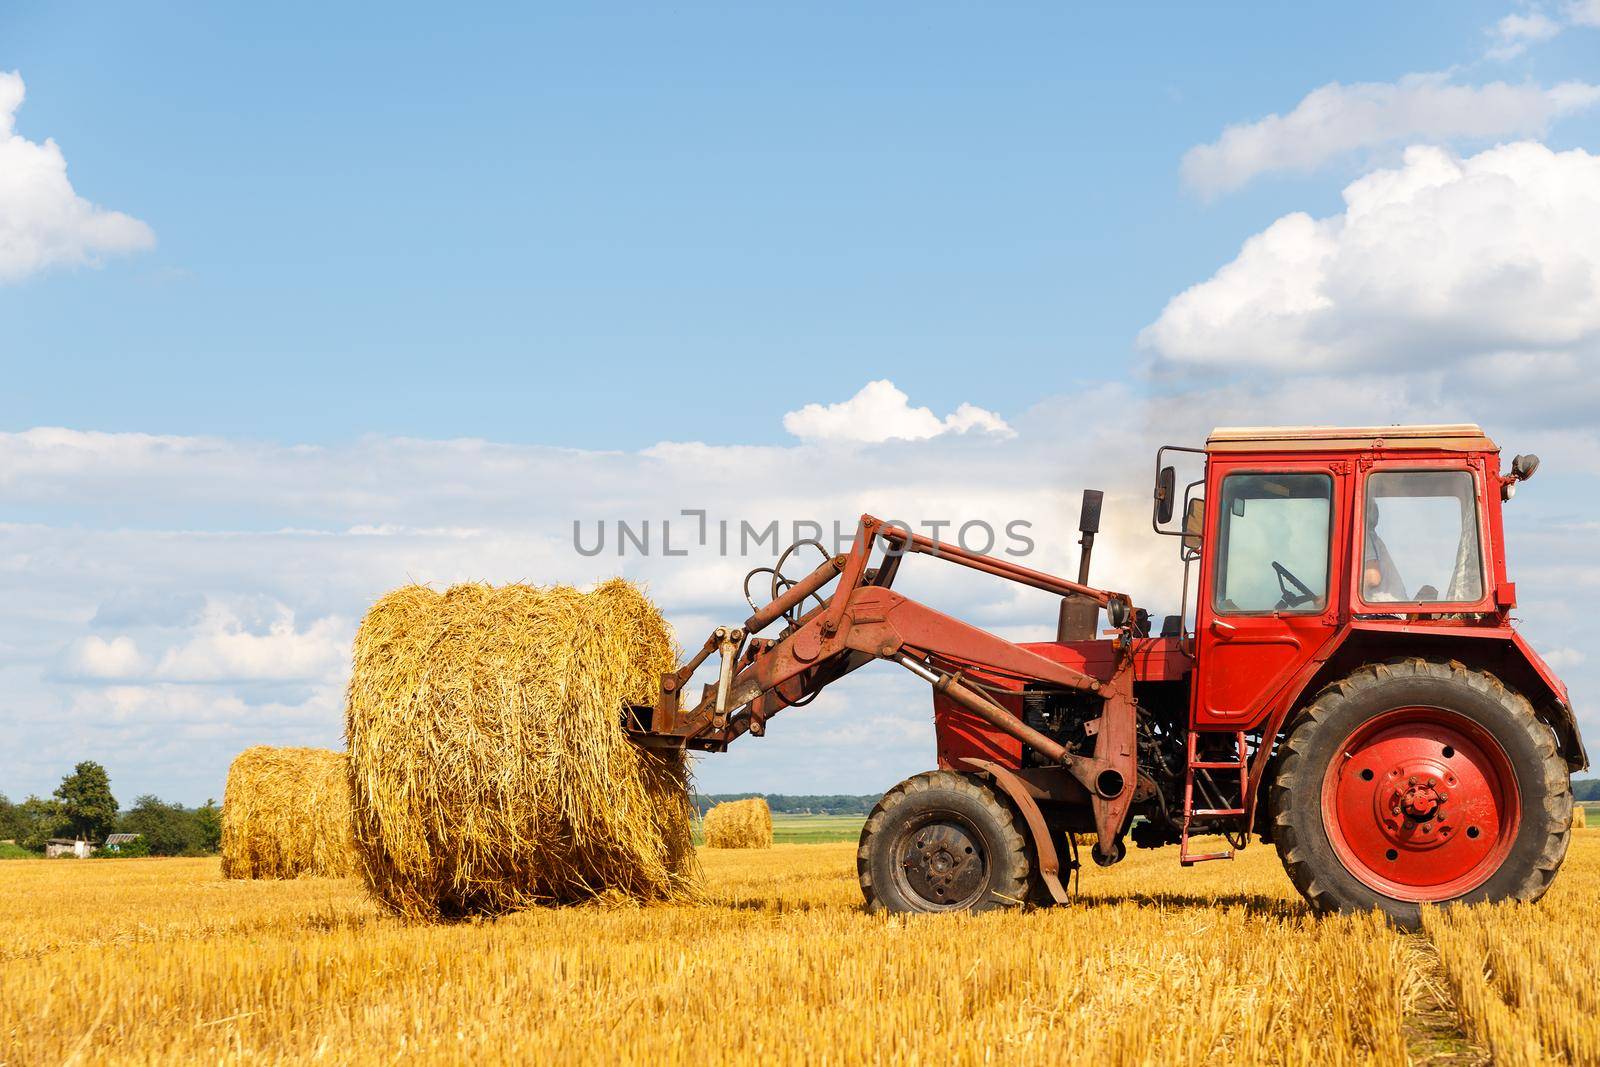 Tractor carrying hay by BY-_-BY